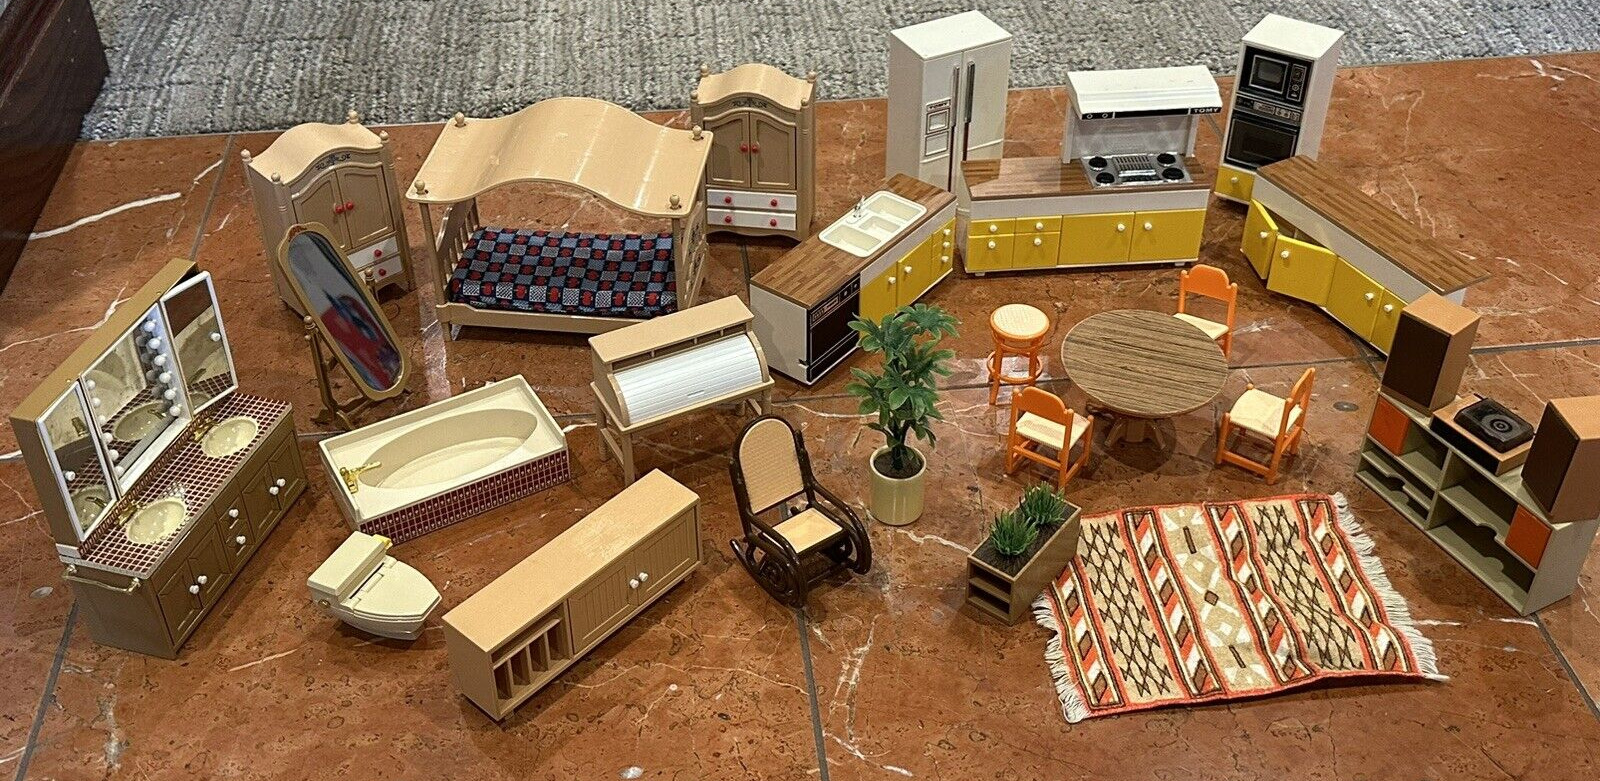 TOMY SMALLER HOMES DOLLHOUSE FURNITURE ACCESSORIES MCM 1970S HUGE LOT EUC